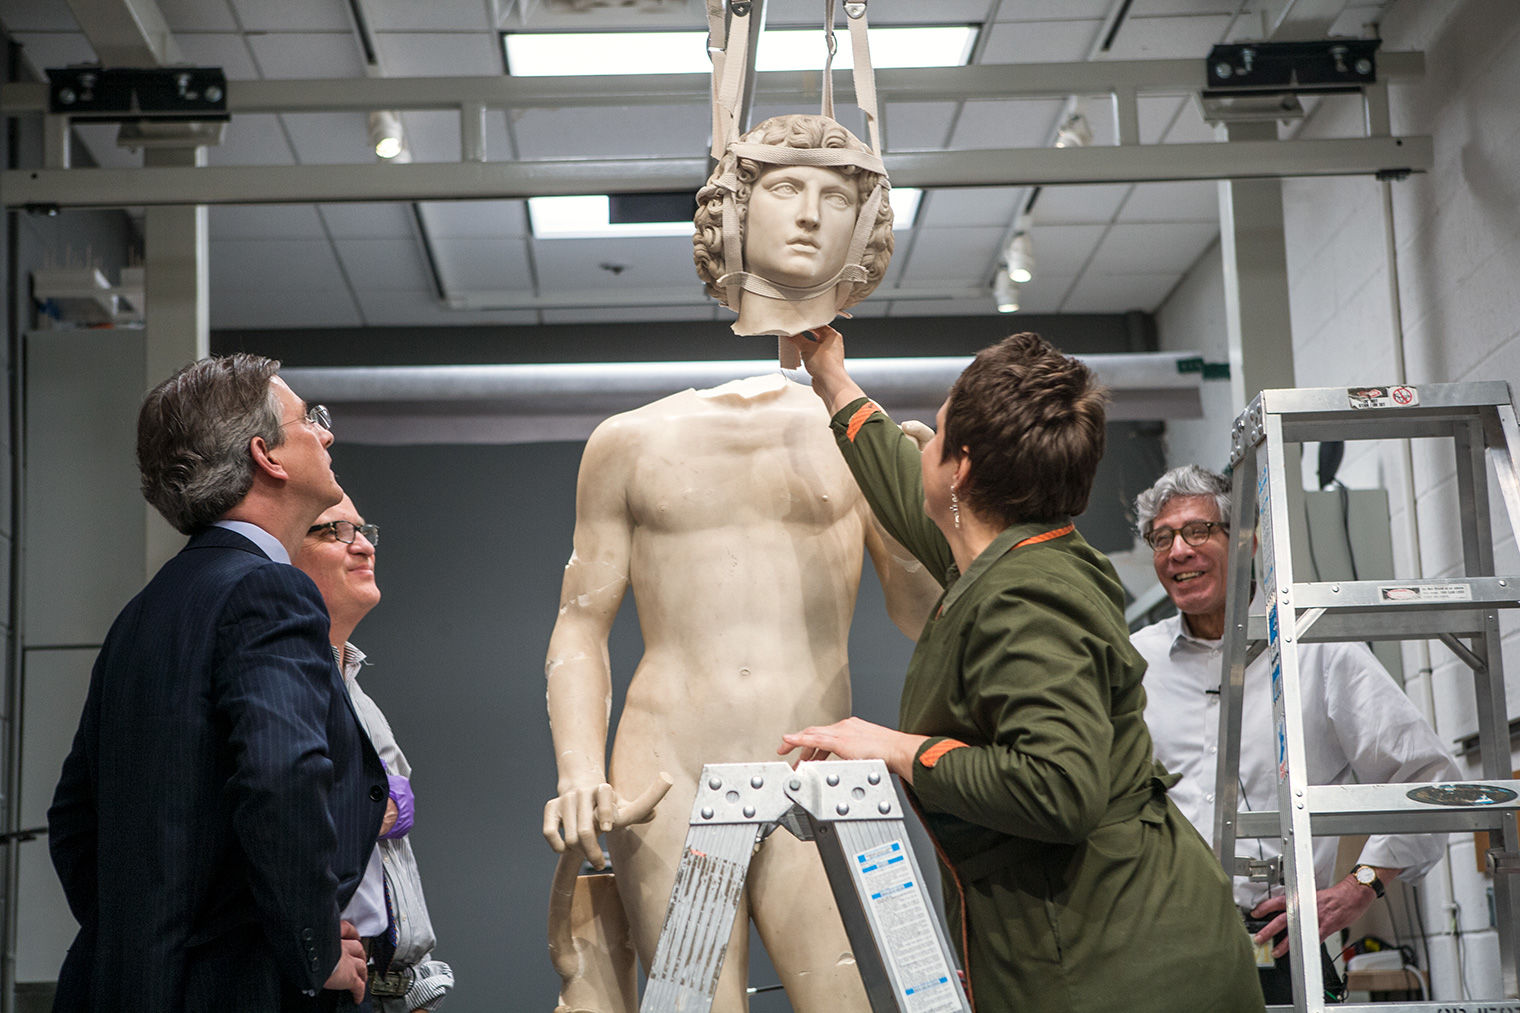 In a gray-walled room, four people stand around Adam as his head, hanging from a harness, is reattached to his body.